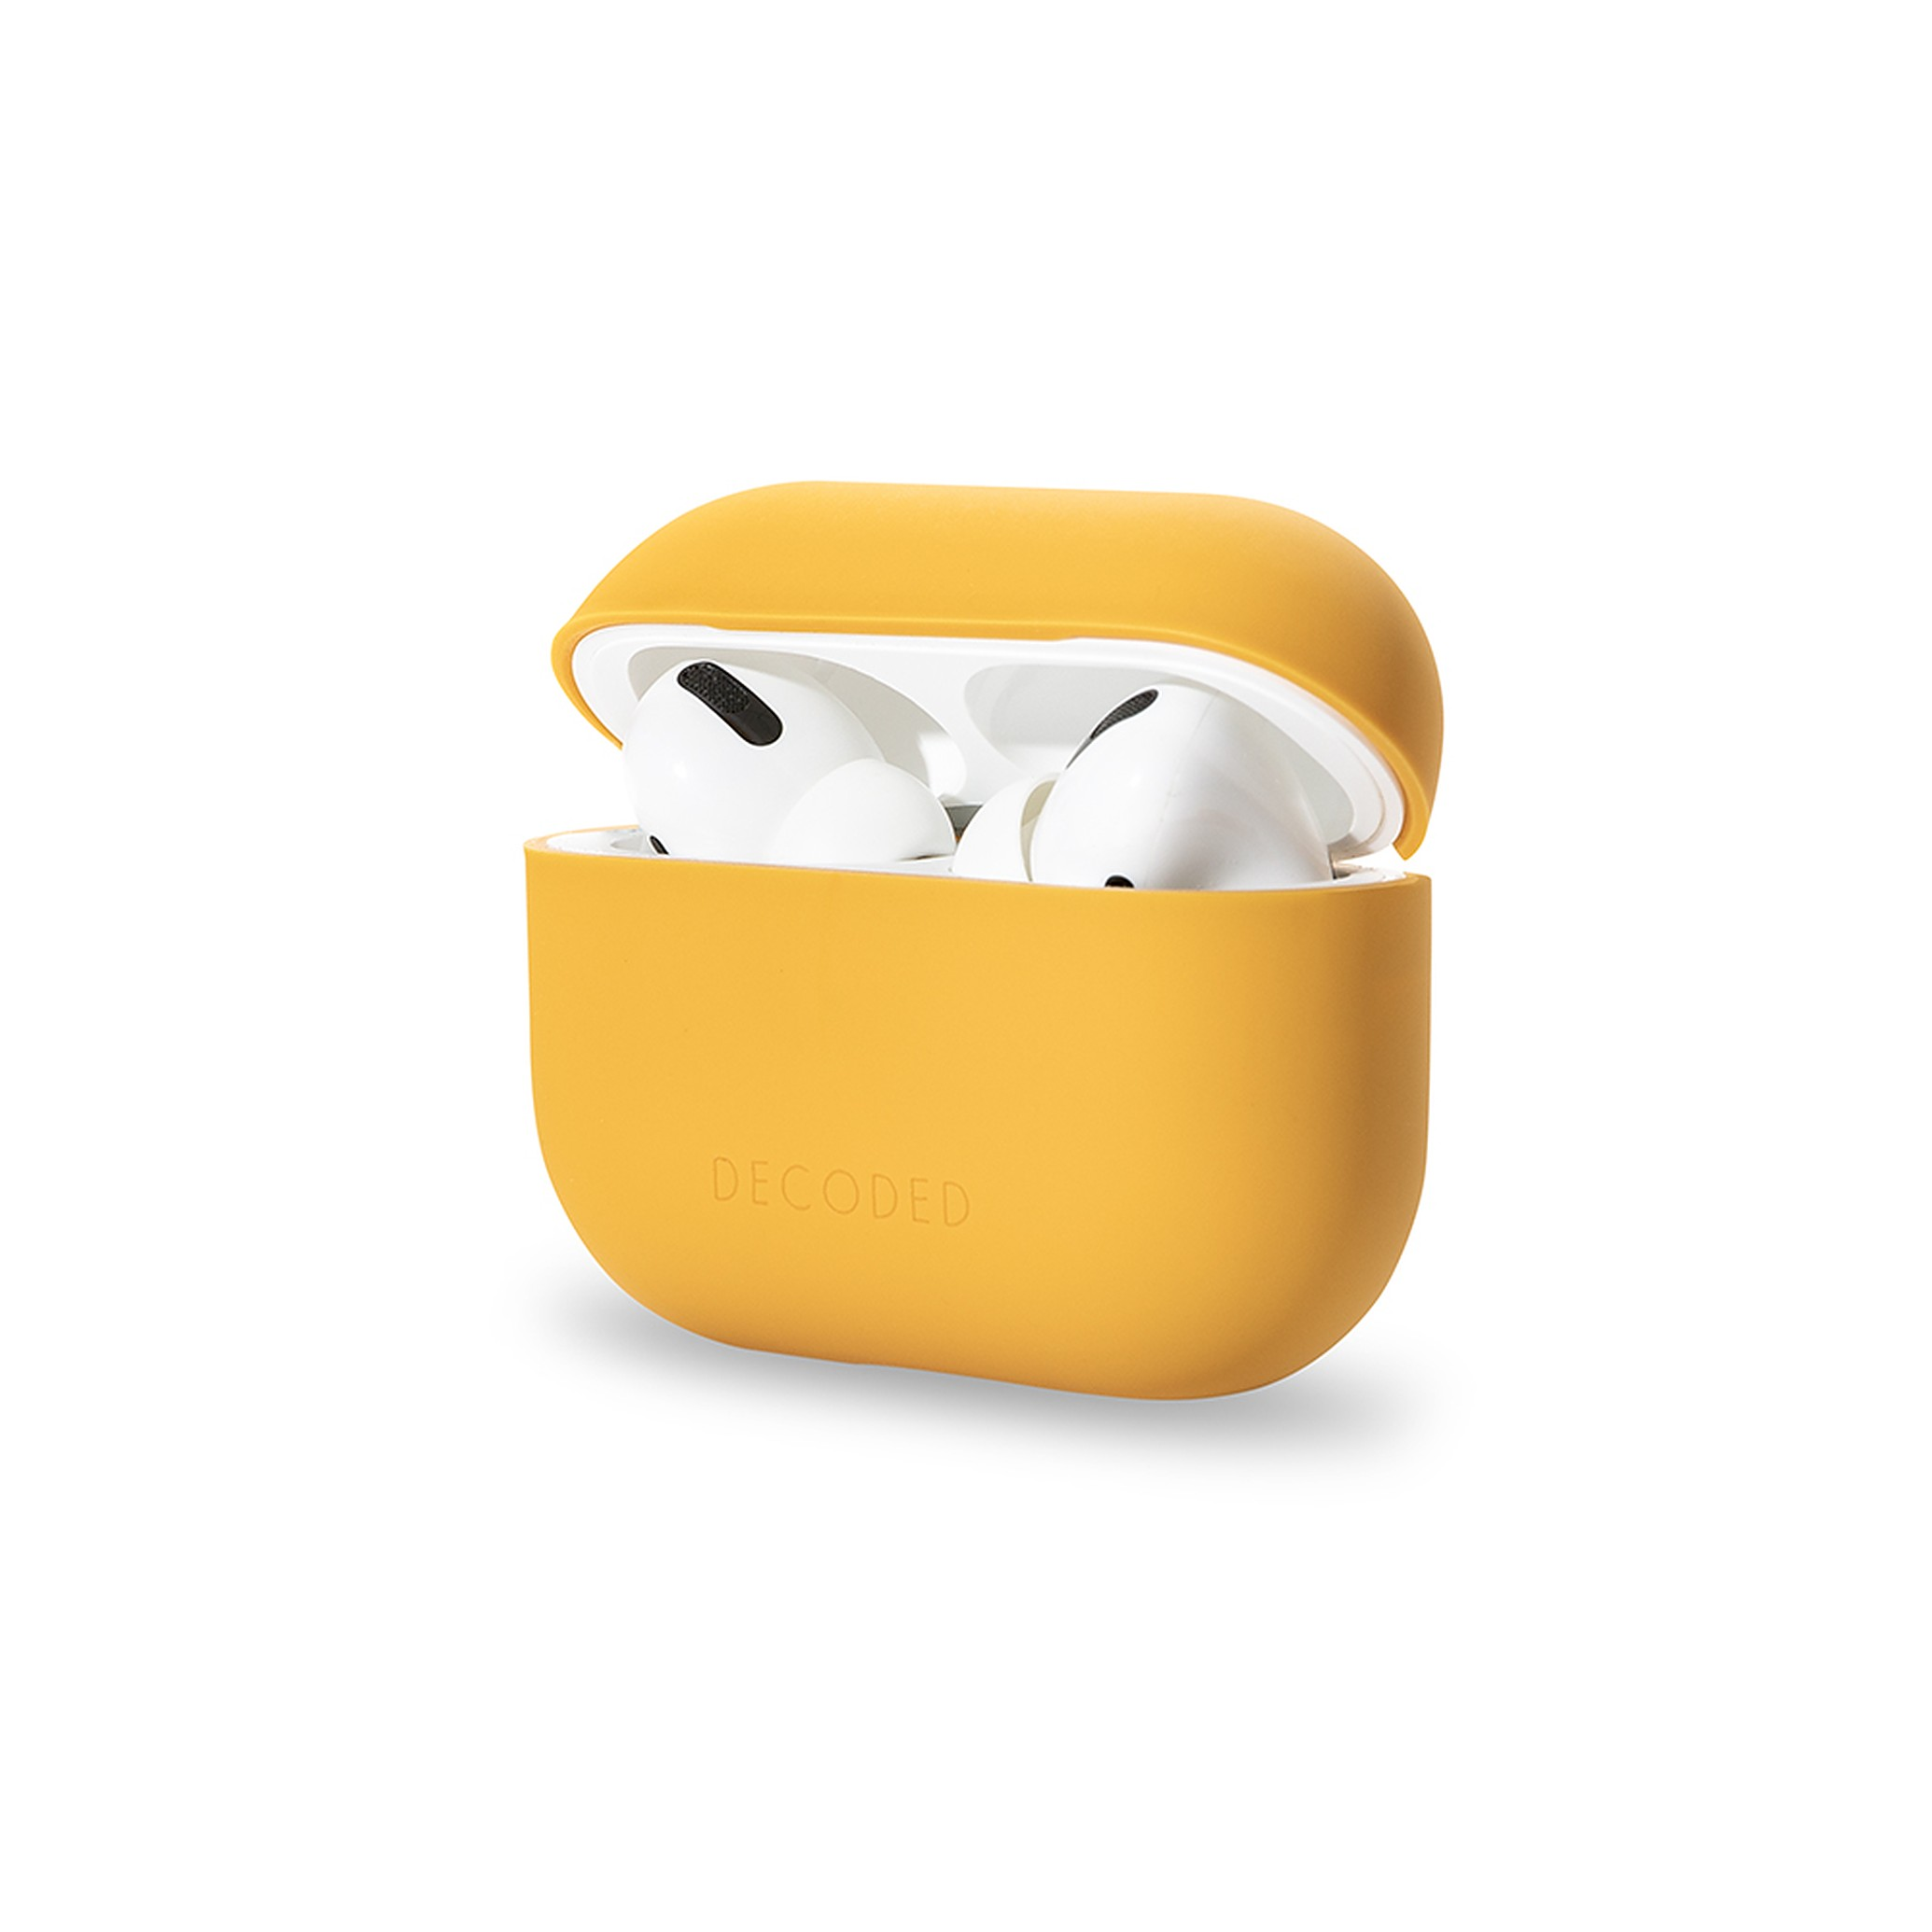 Airpods DECODED Cover, Sun 3, Aircase, Apple, Tuscan Full